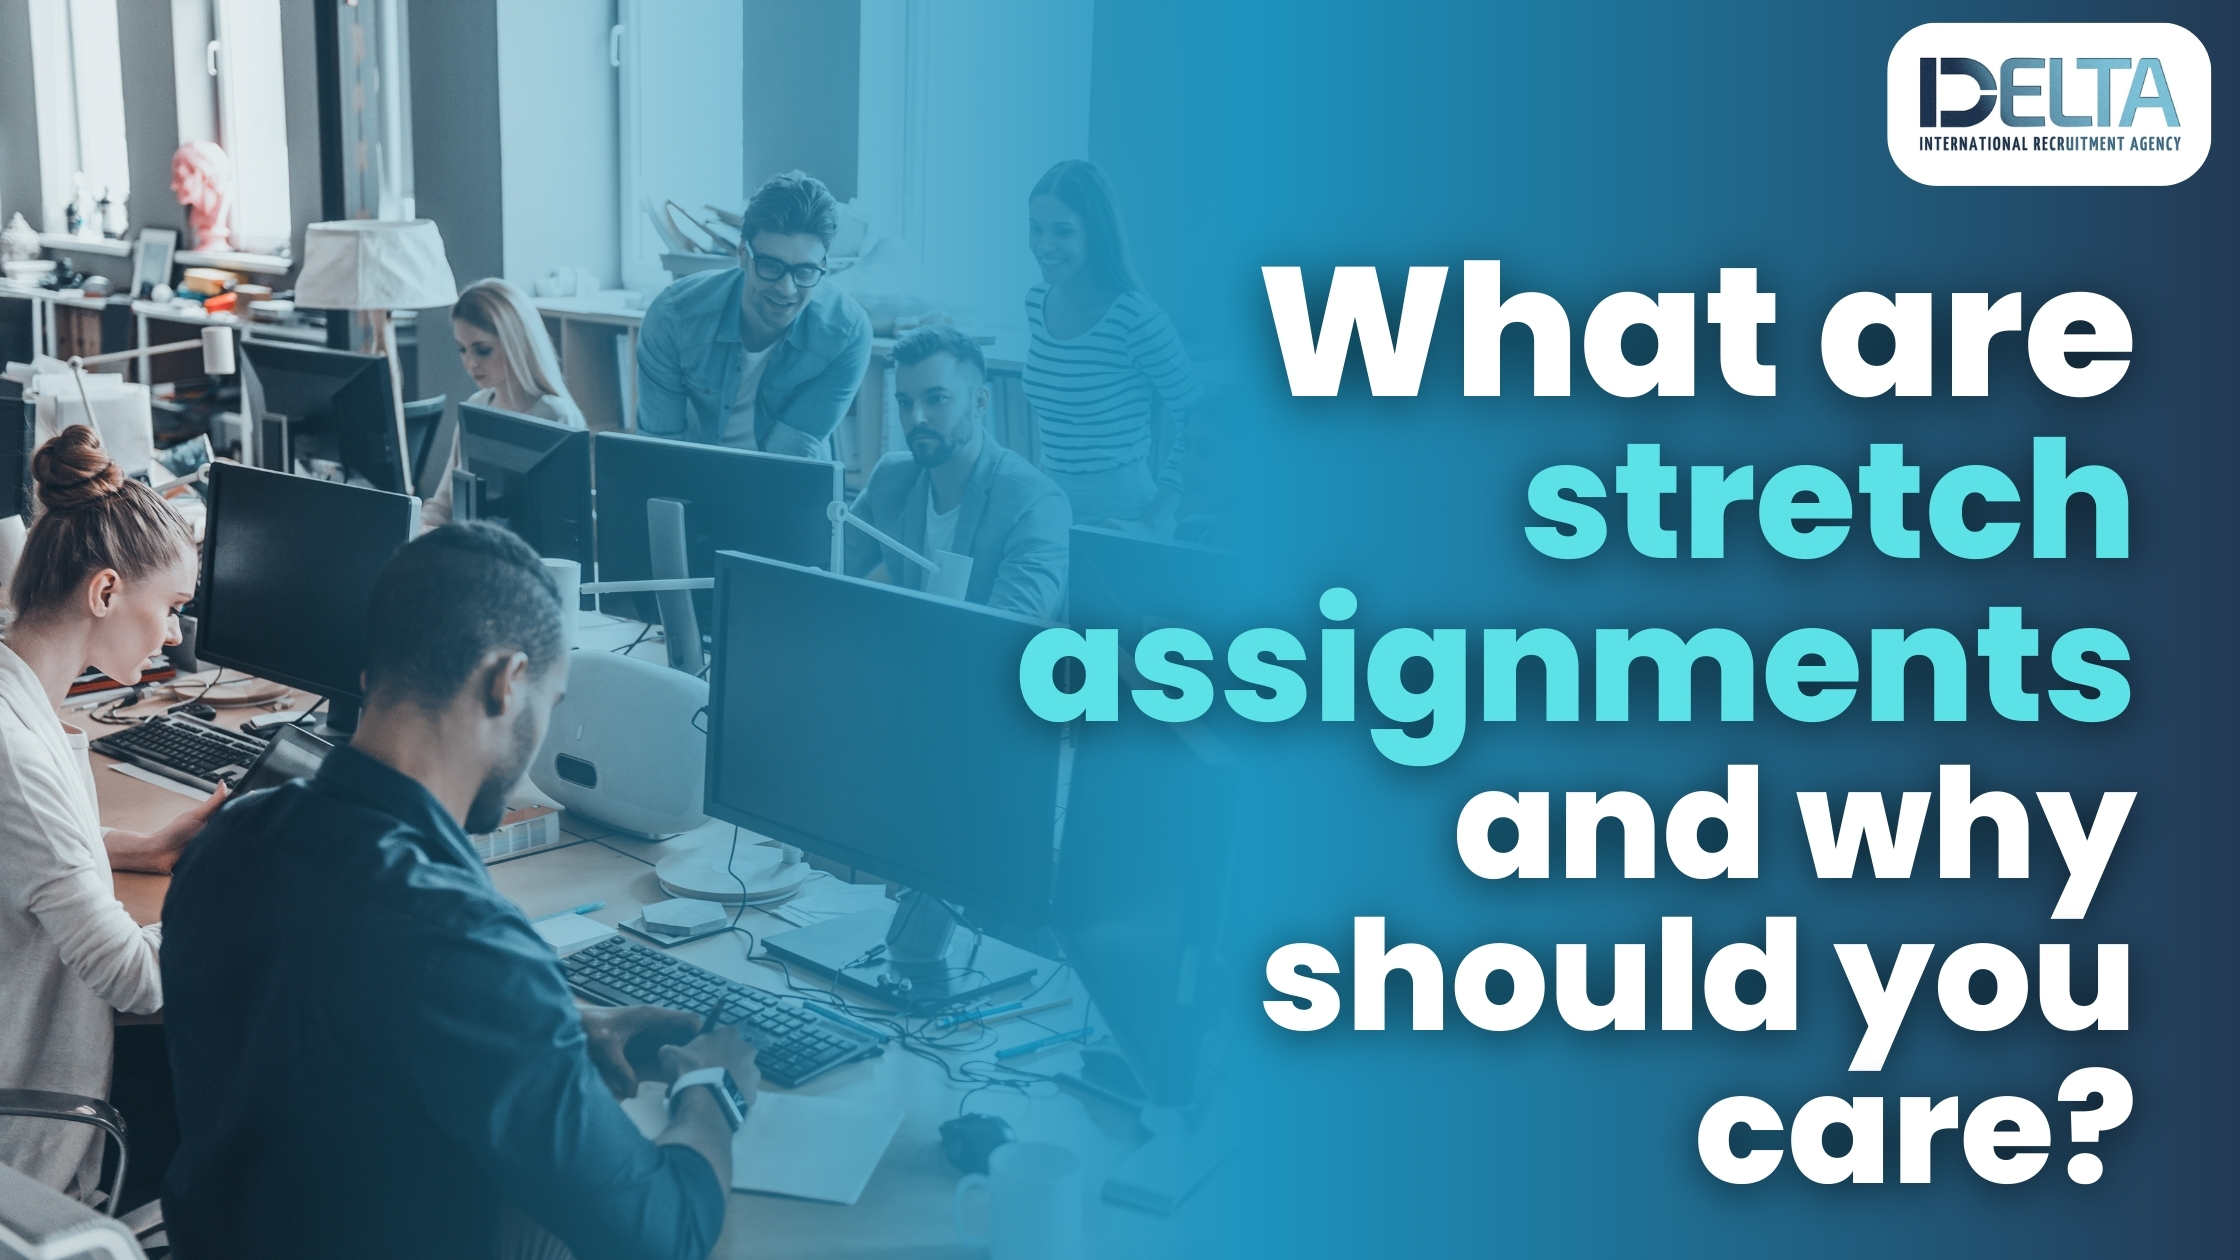 What are stretch assignments and why should you care?